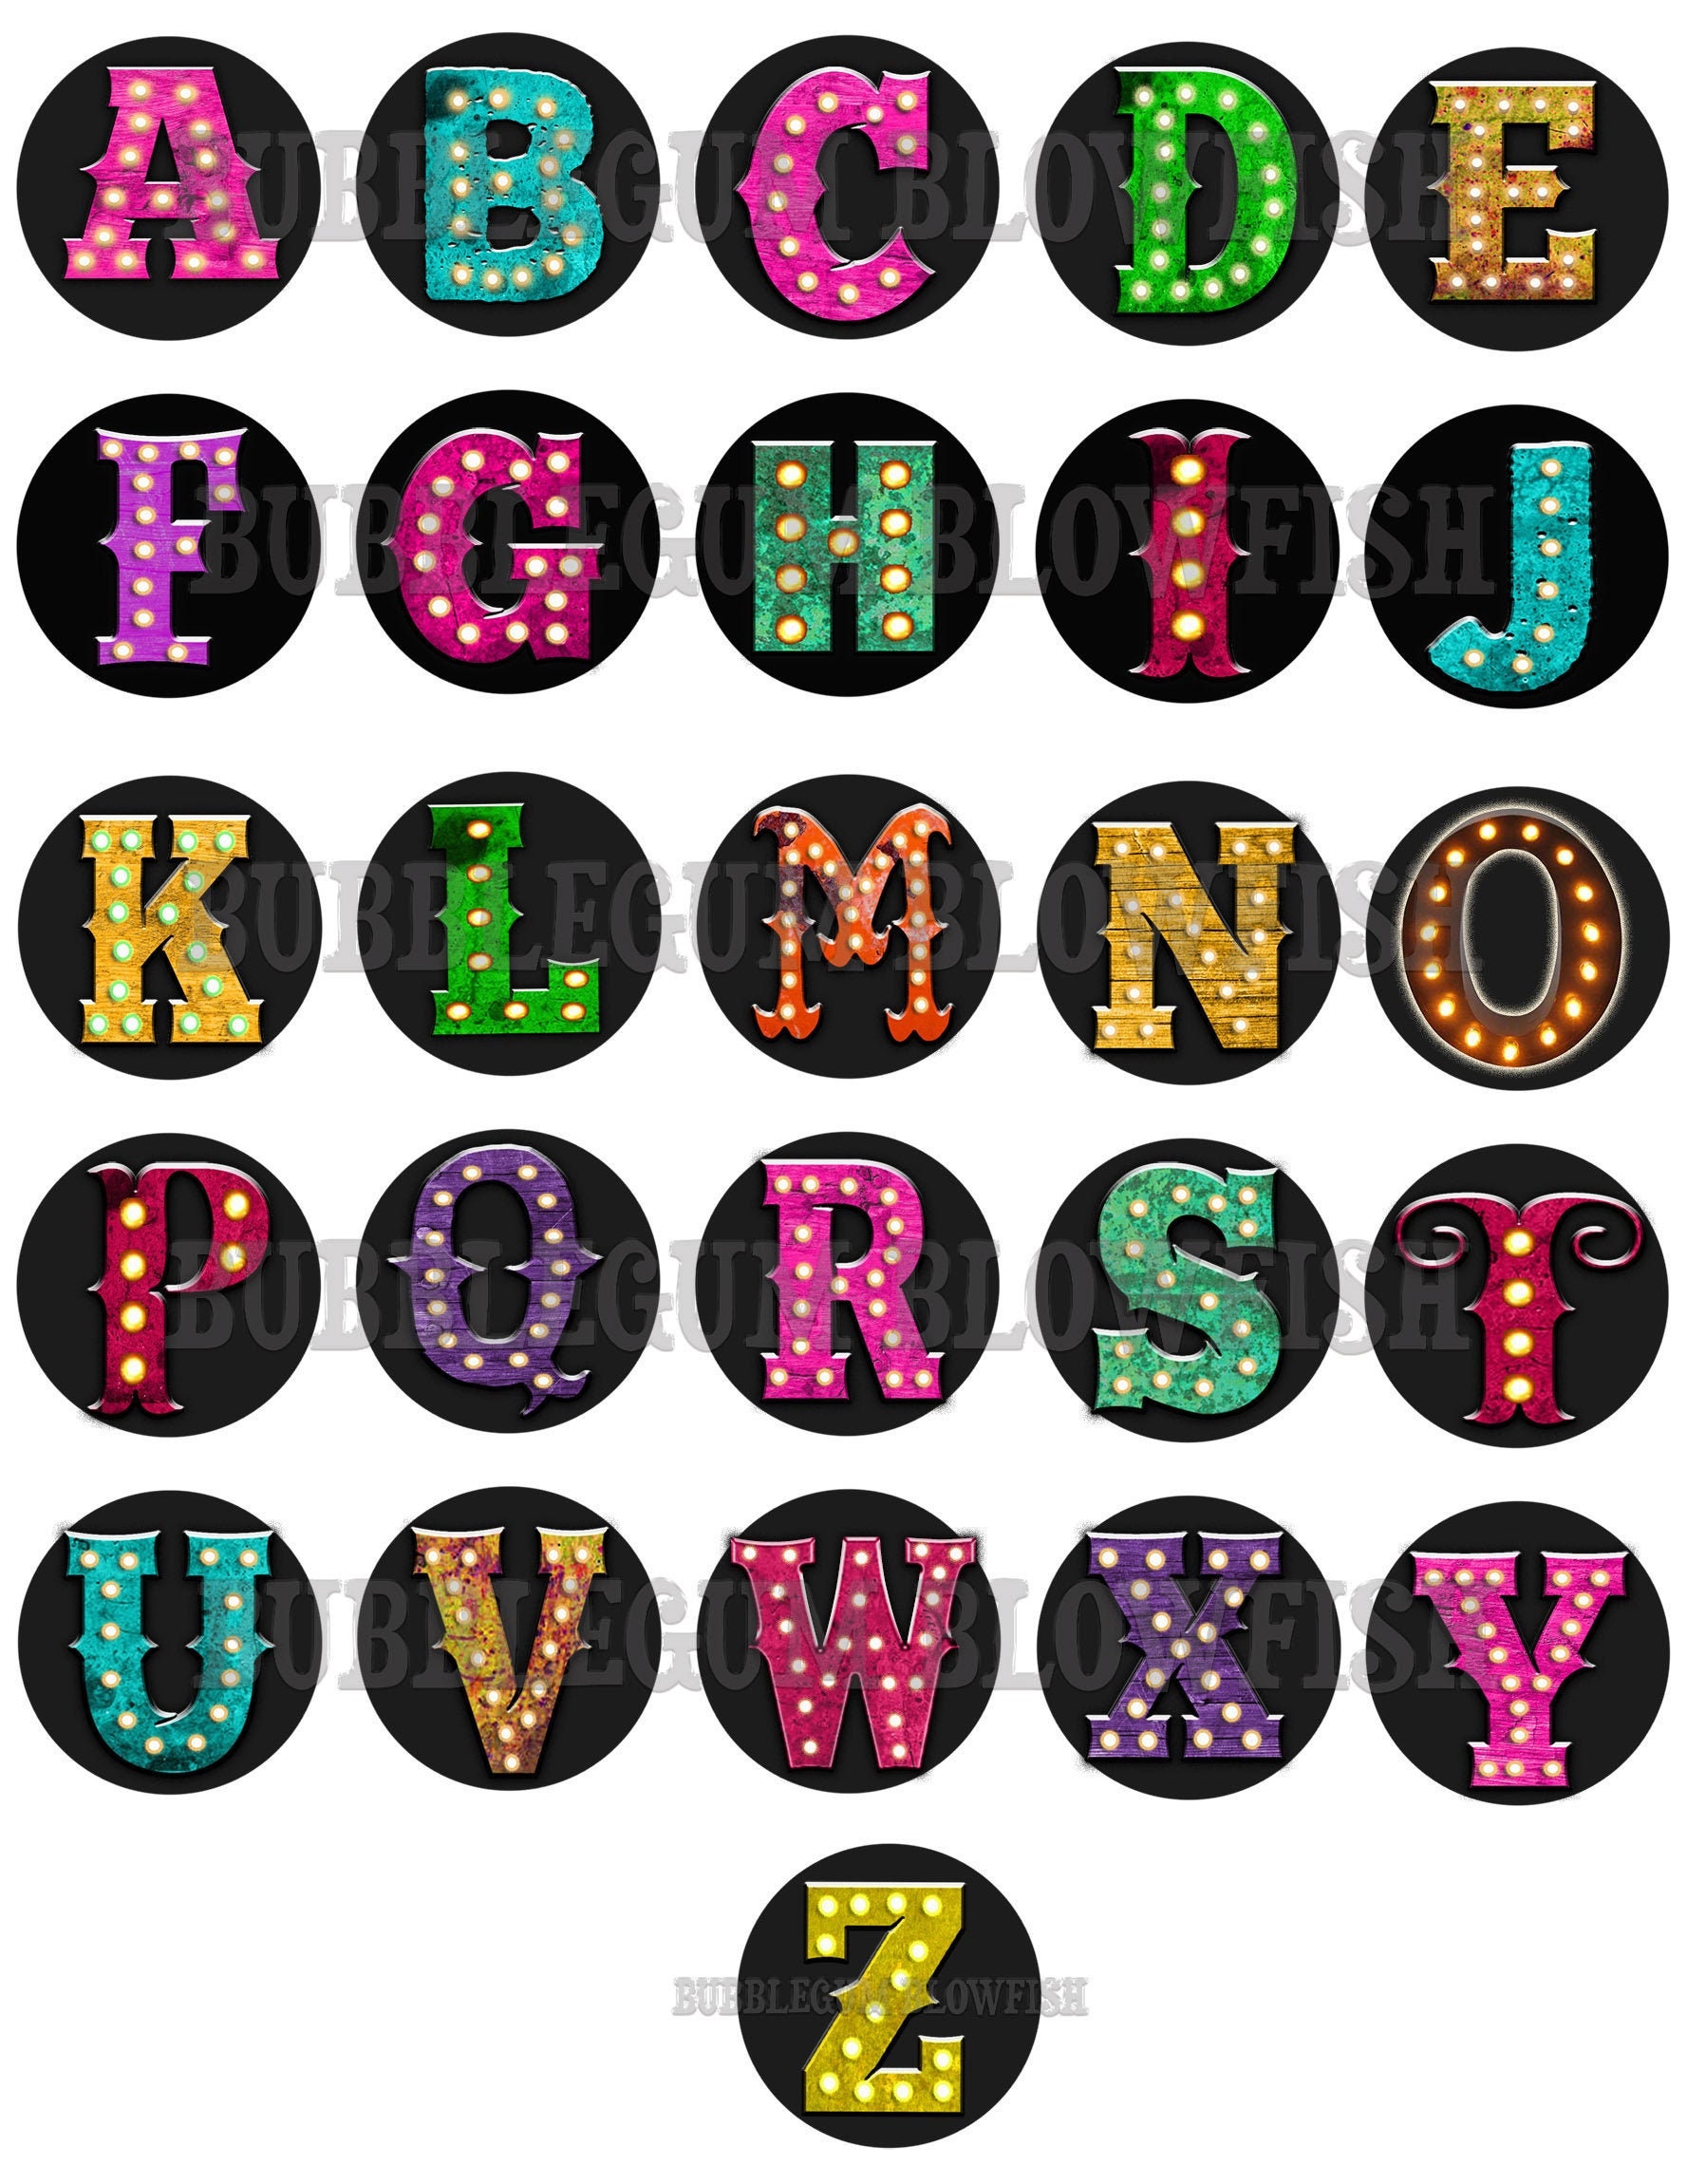 Colorful Funky Marquee Light Alphabet Letters SINGLE File PNG